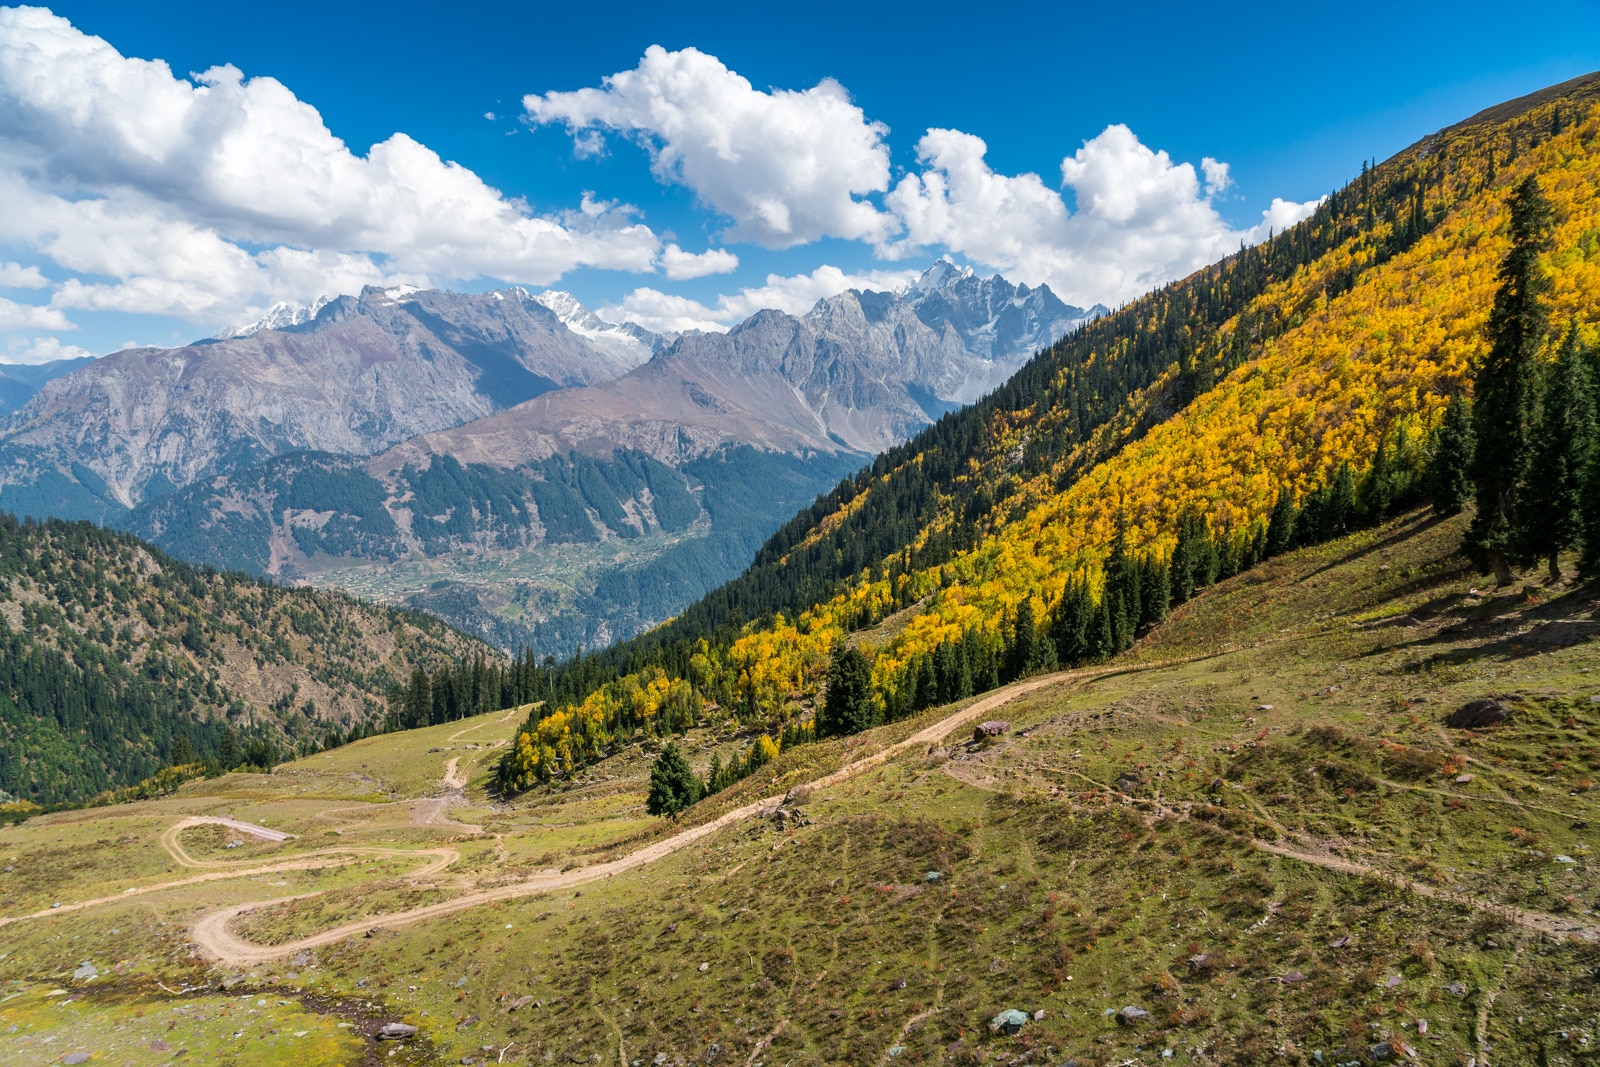 Trees and mountains in autumn in Swat Valley, Khyber Pakhtunkhwa, Pakistan